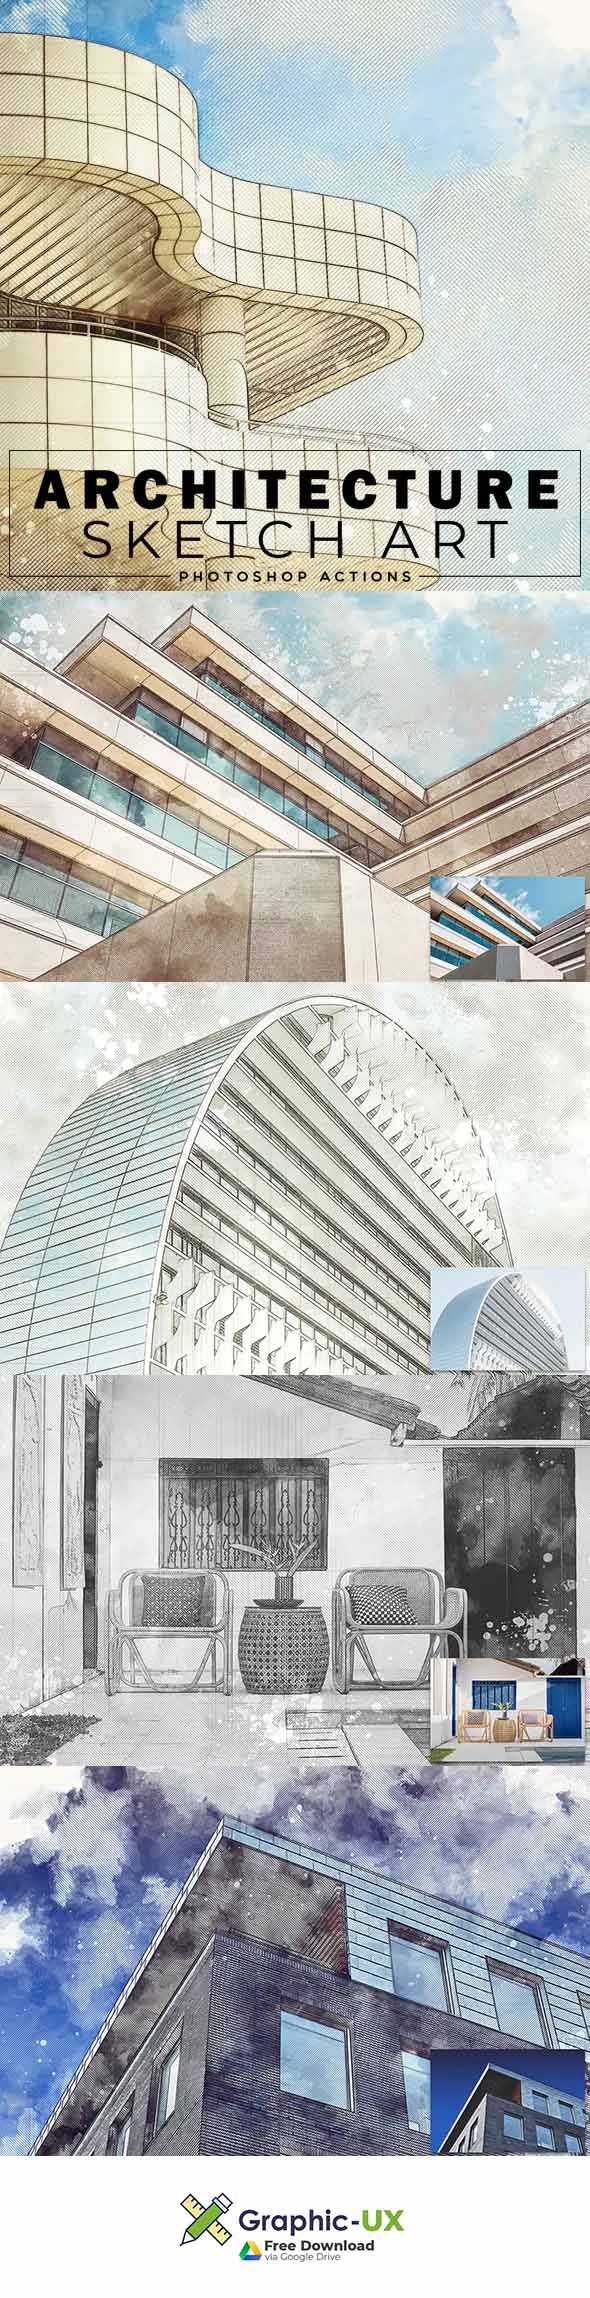 download archi sketch photoshop action free